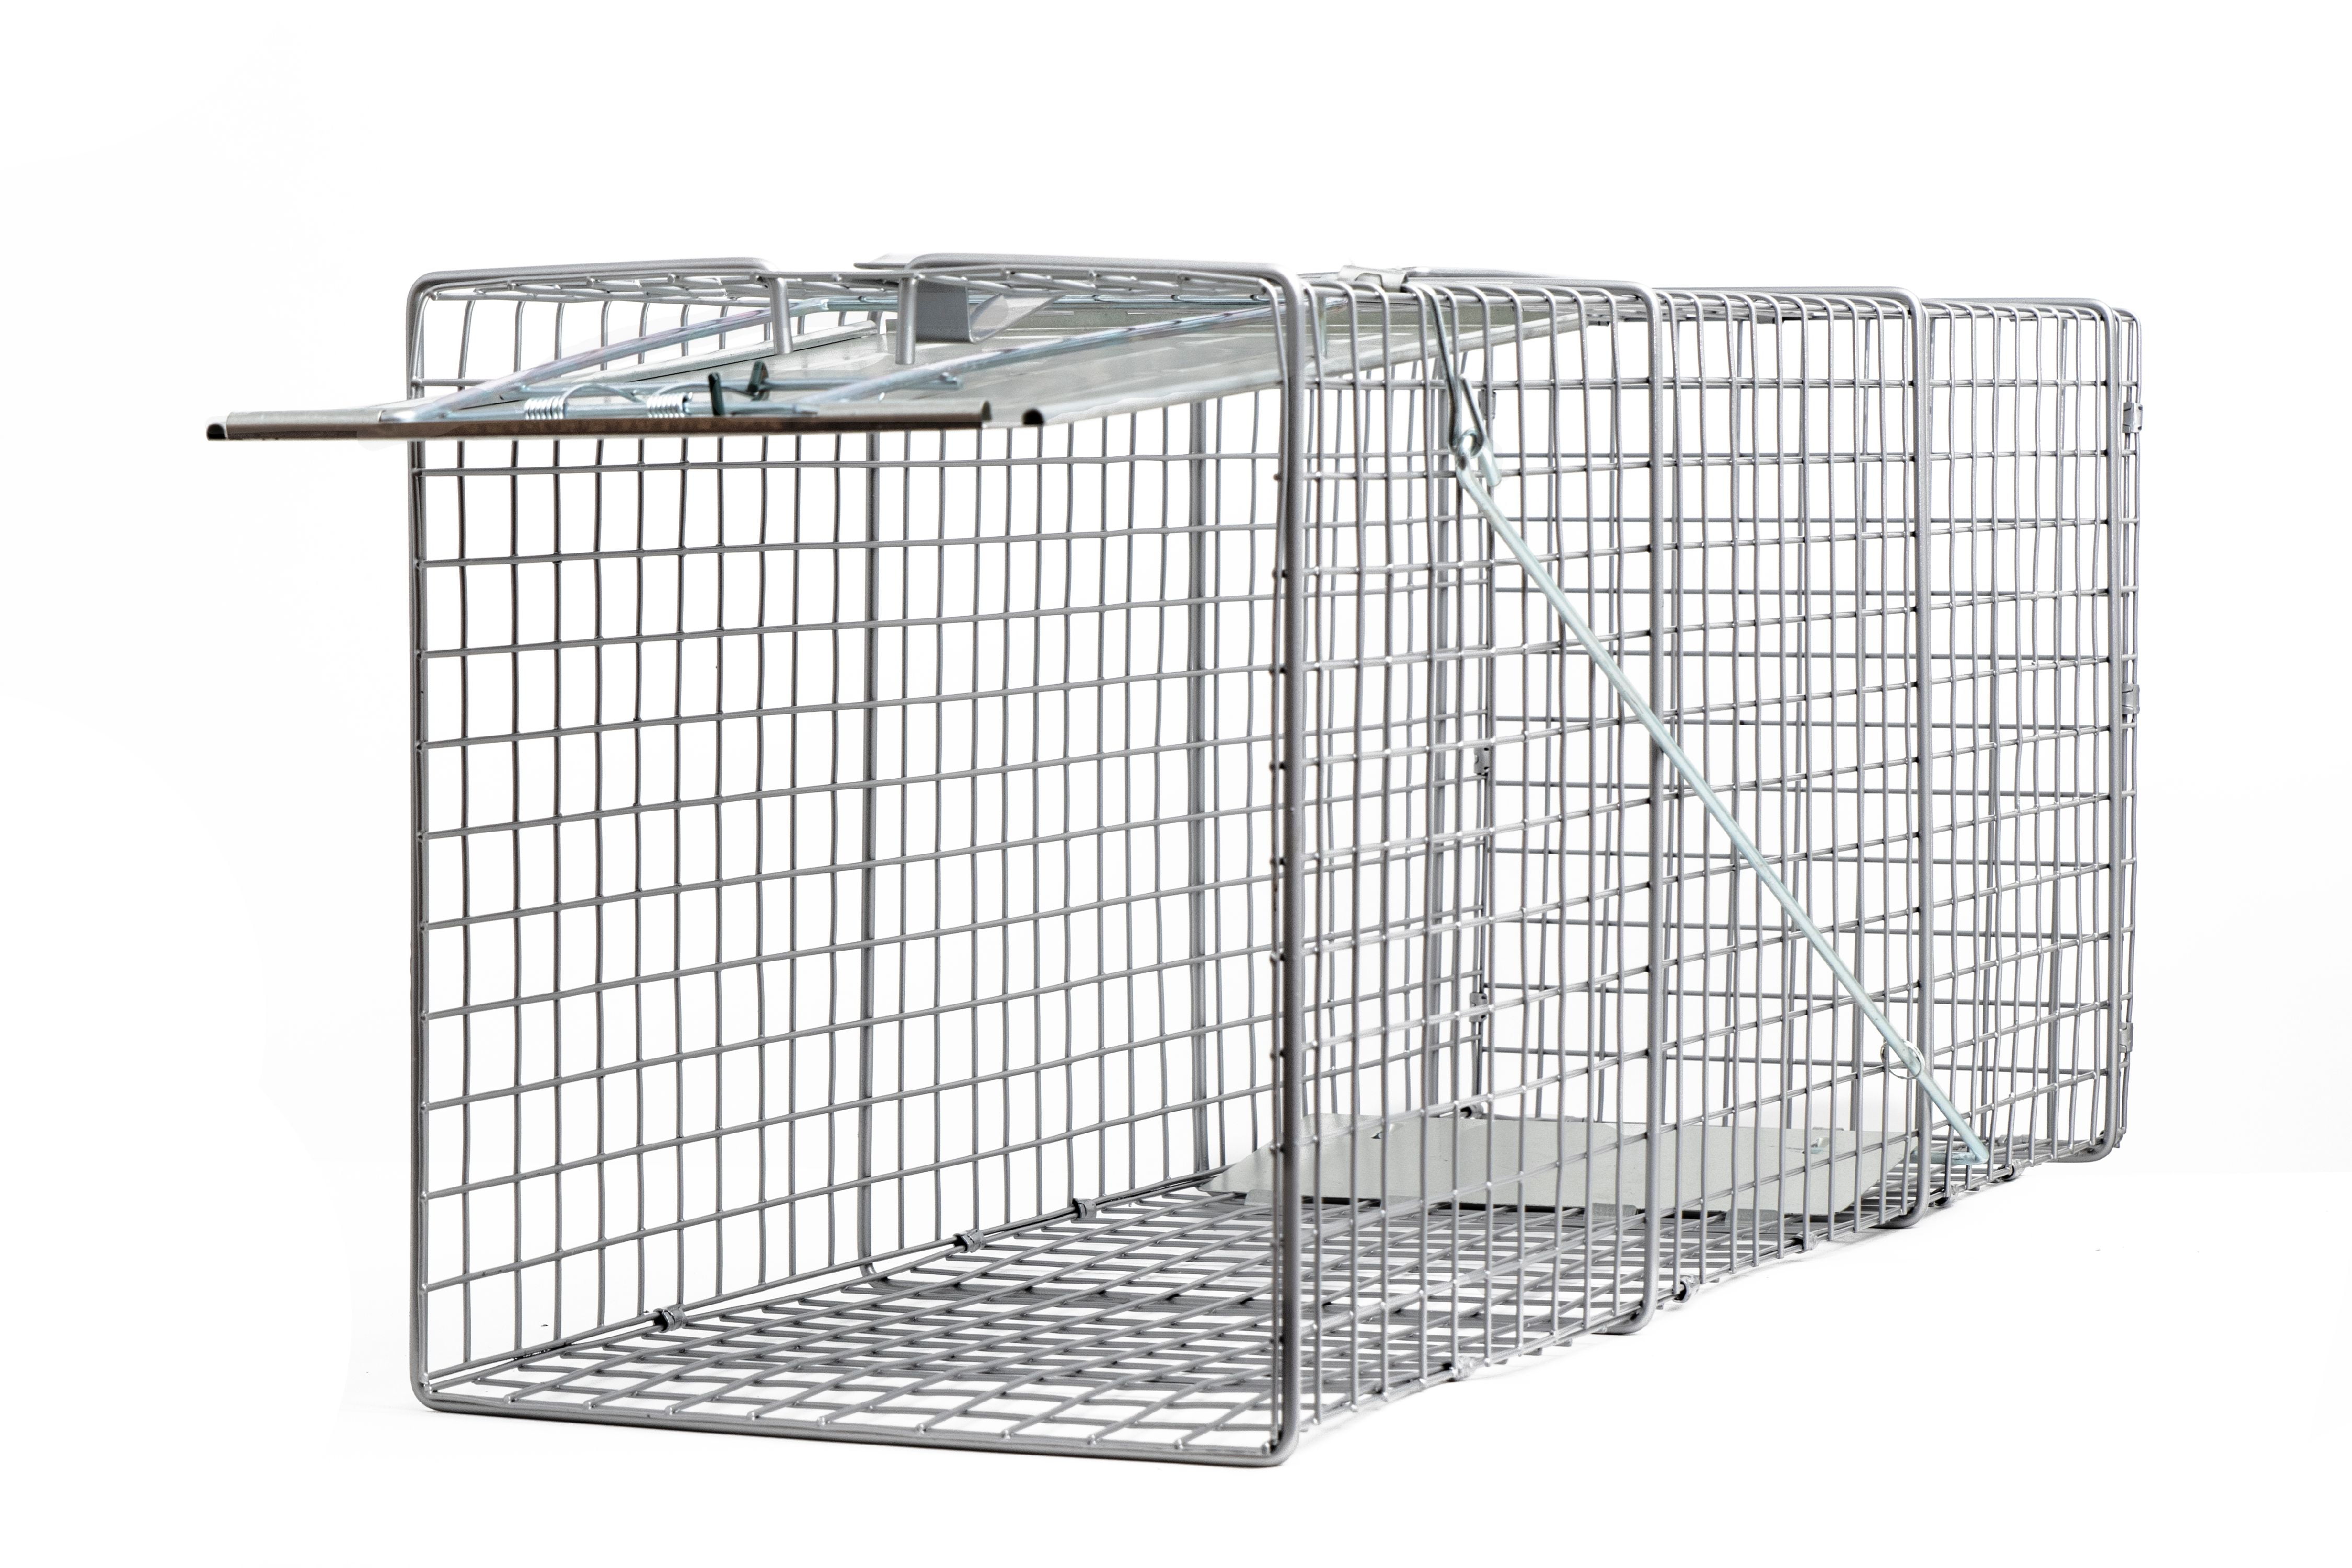 Large One Door Catch Release Heavy Duty Cage Live Animal Trap for Gophers,  Oppossums, Groundhogs, Beavers, and Other Similar Sized Animals,  32